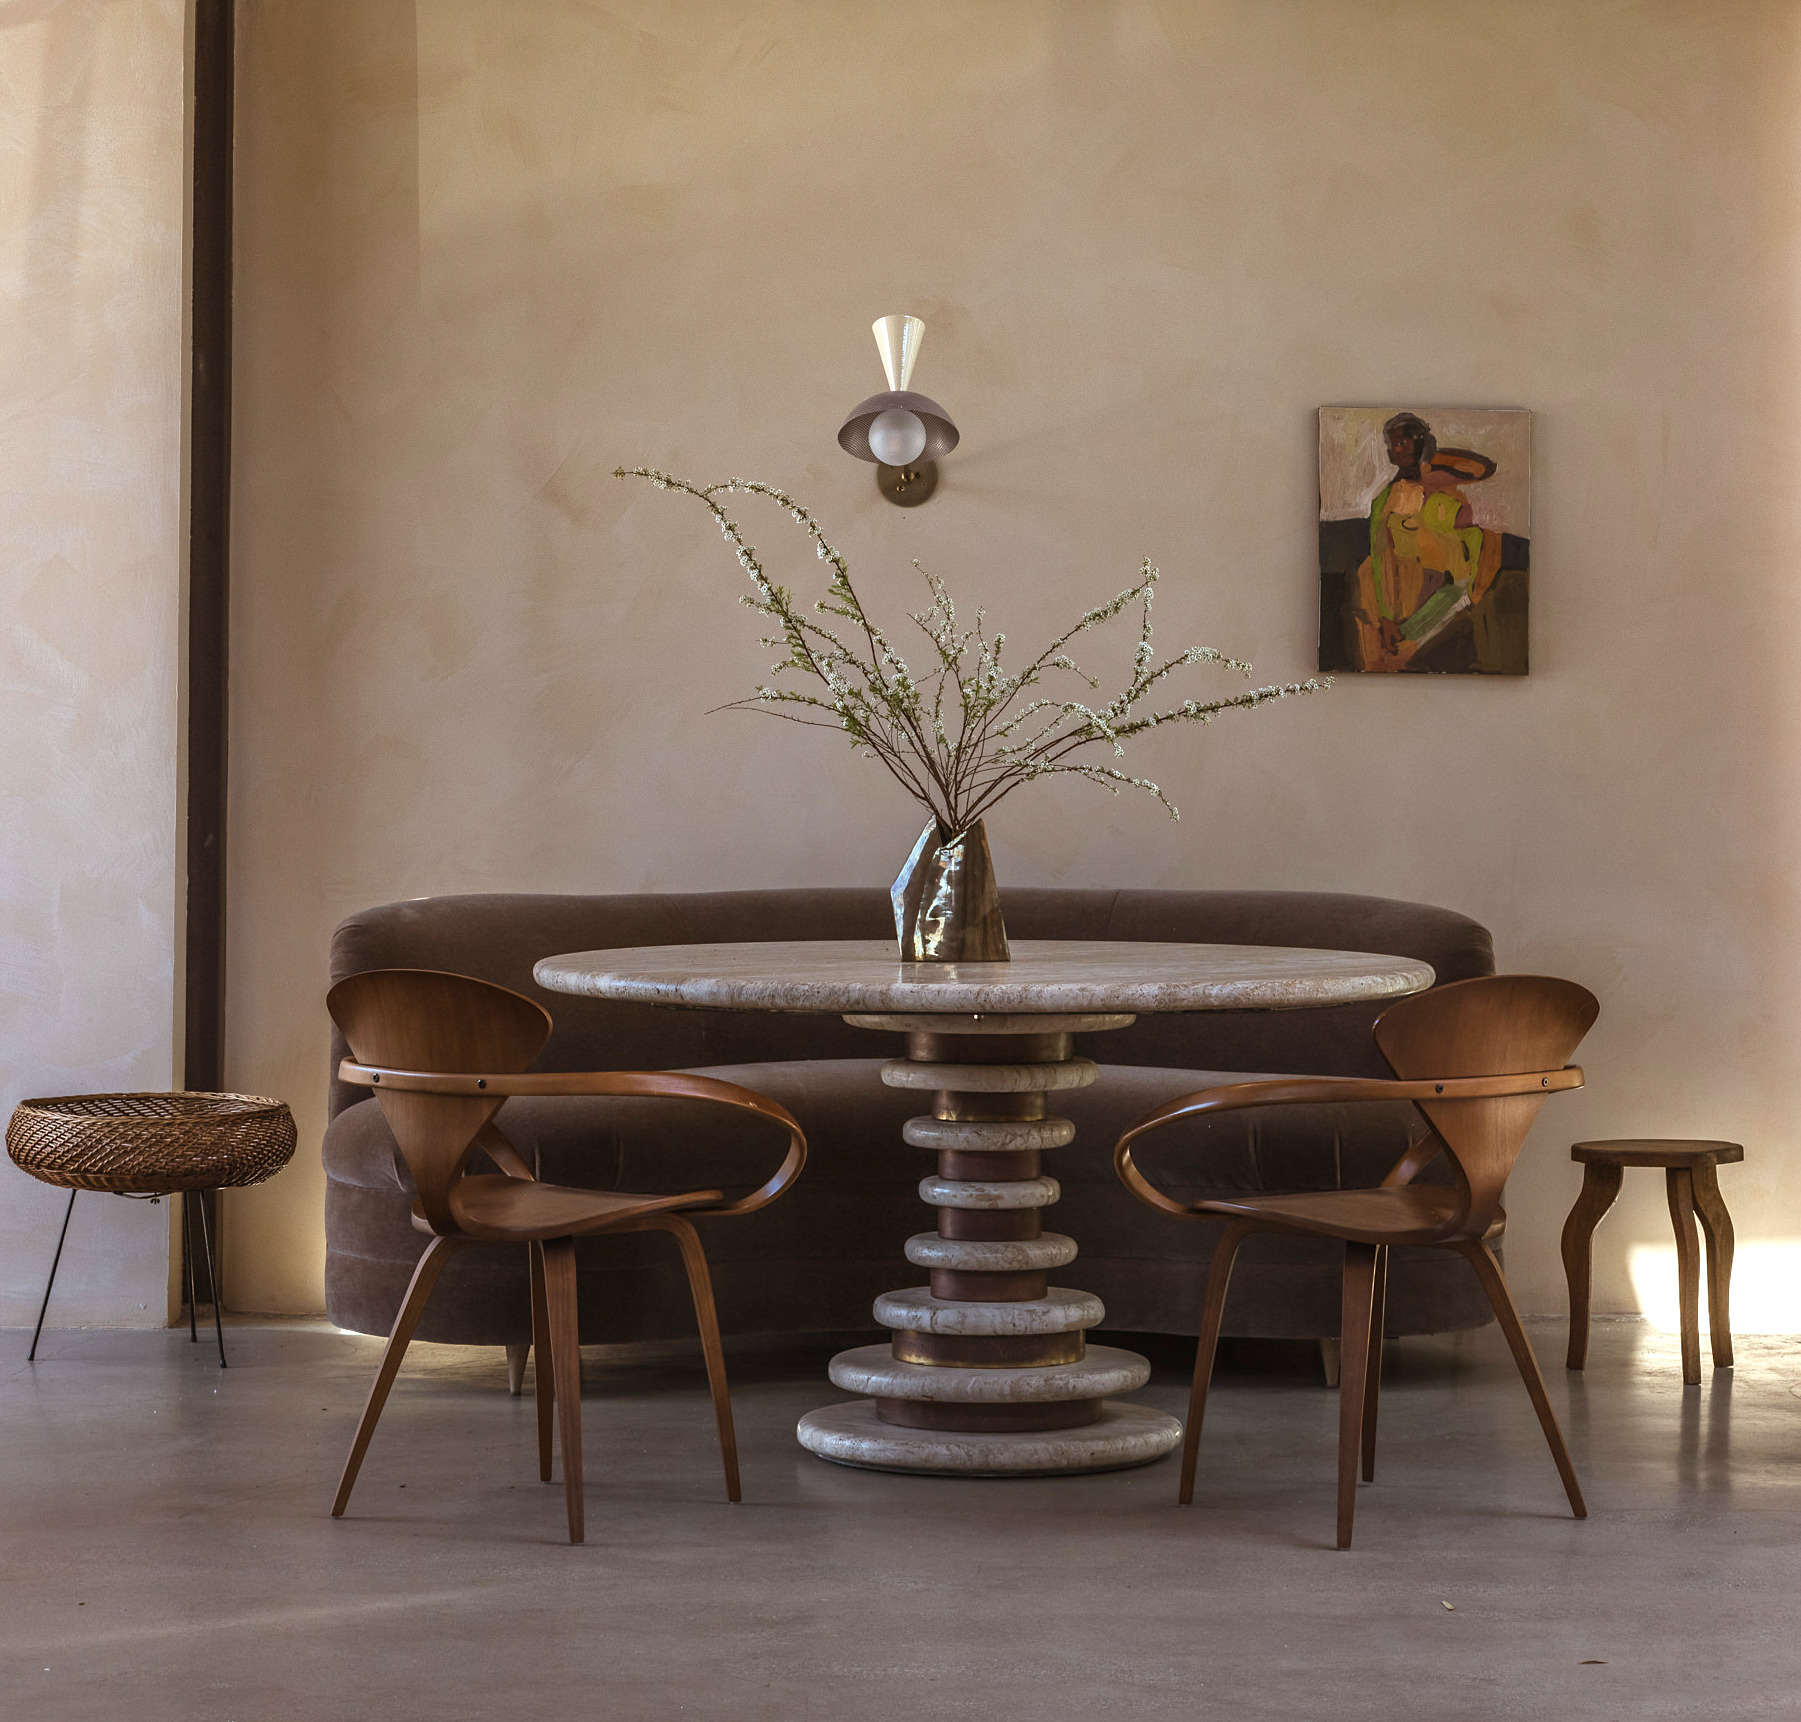 Brass and travertine banquet table with two Cherner chairs from Mara Akil Office in West Adams, Los Angeles design by Night Palm (Photo: Pablo Enriquez)